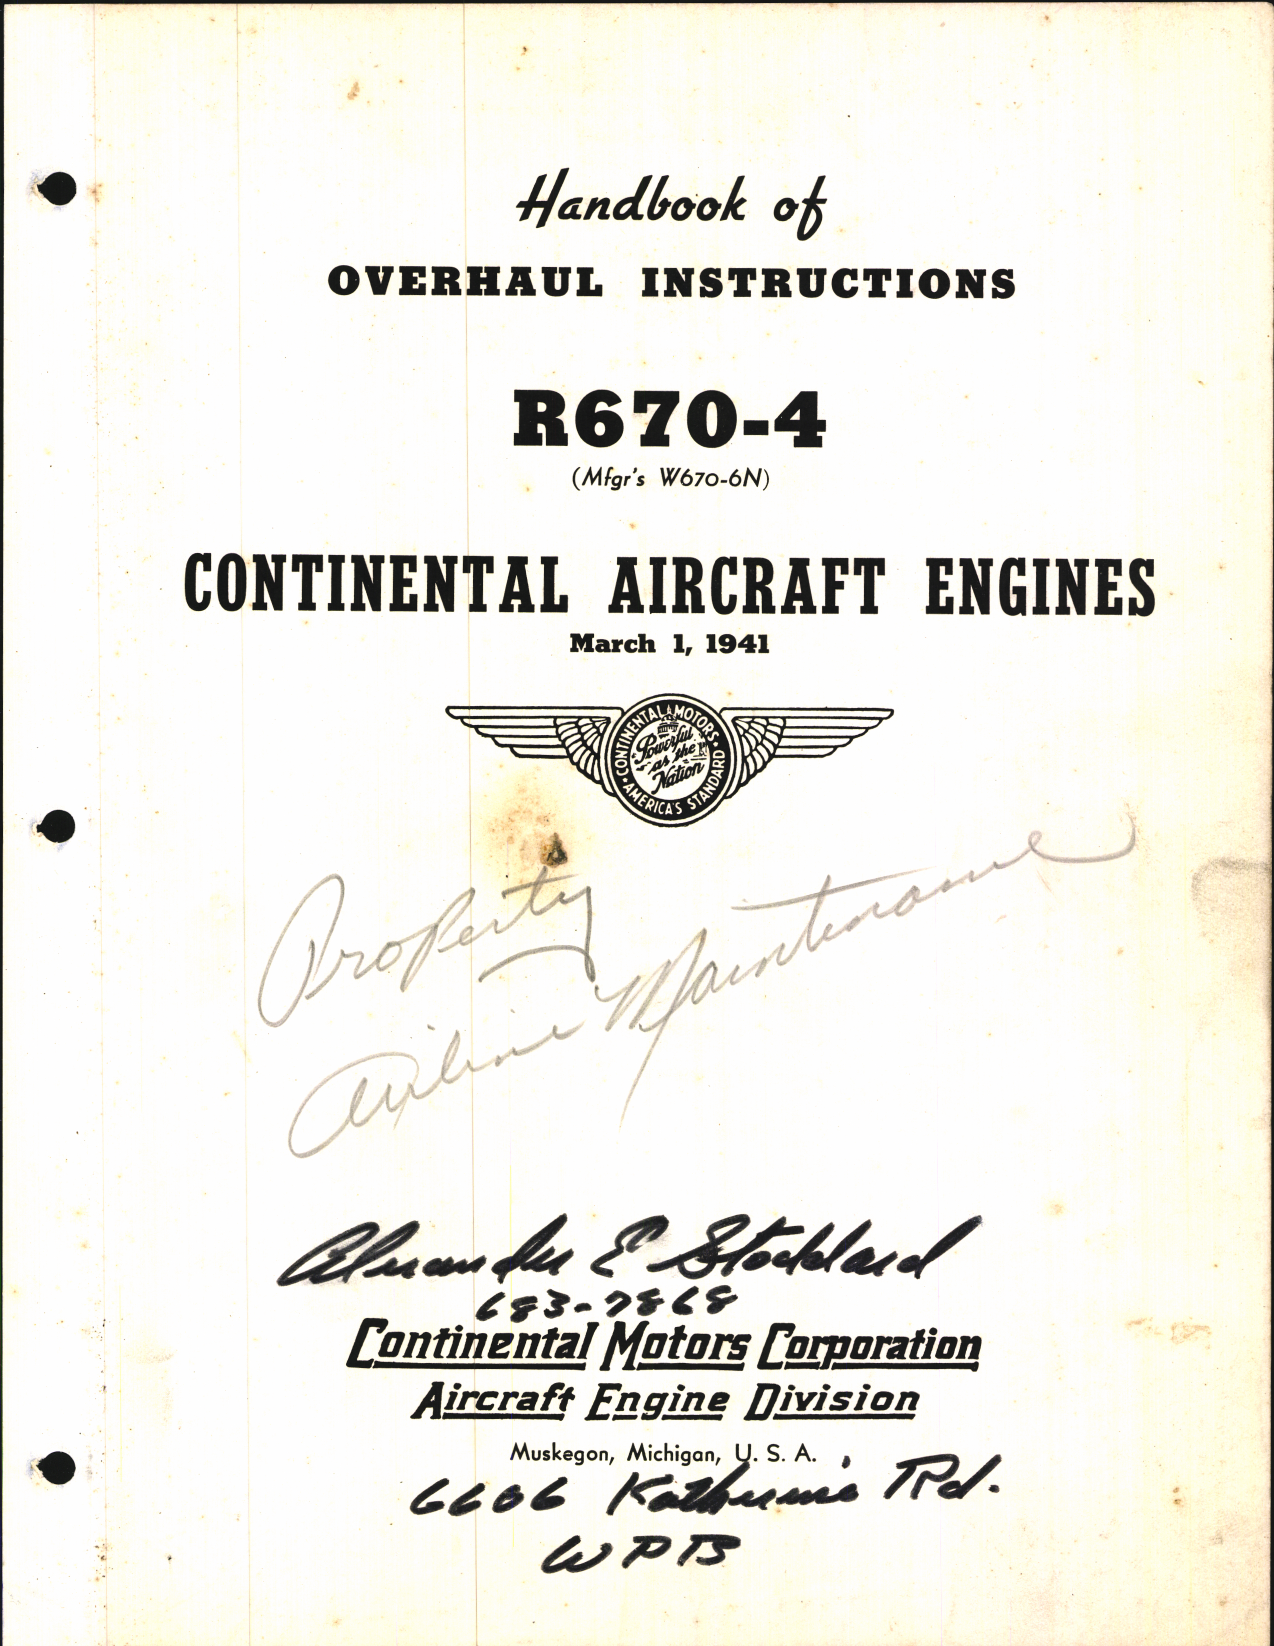 Sample page 1 from AirCorps Library document: Handbook of Overhaul Instructions for R670-4 Continental Aircraft Engines